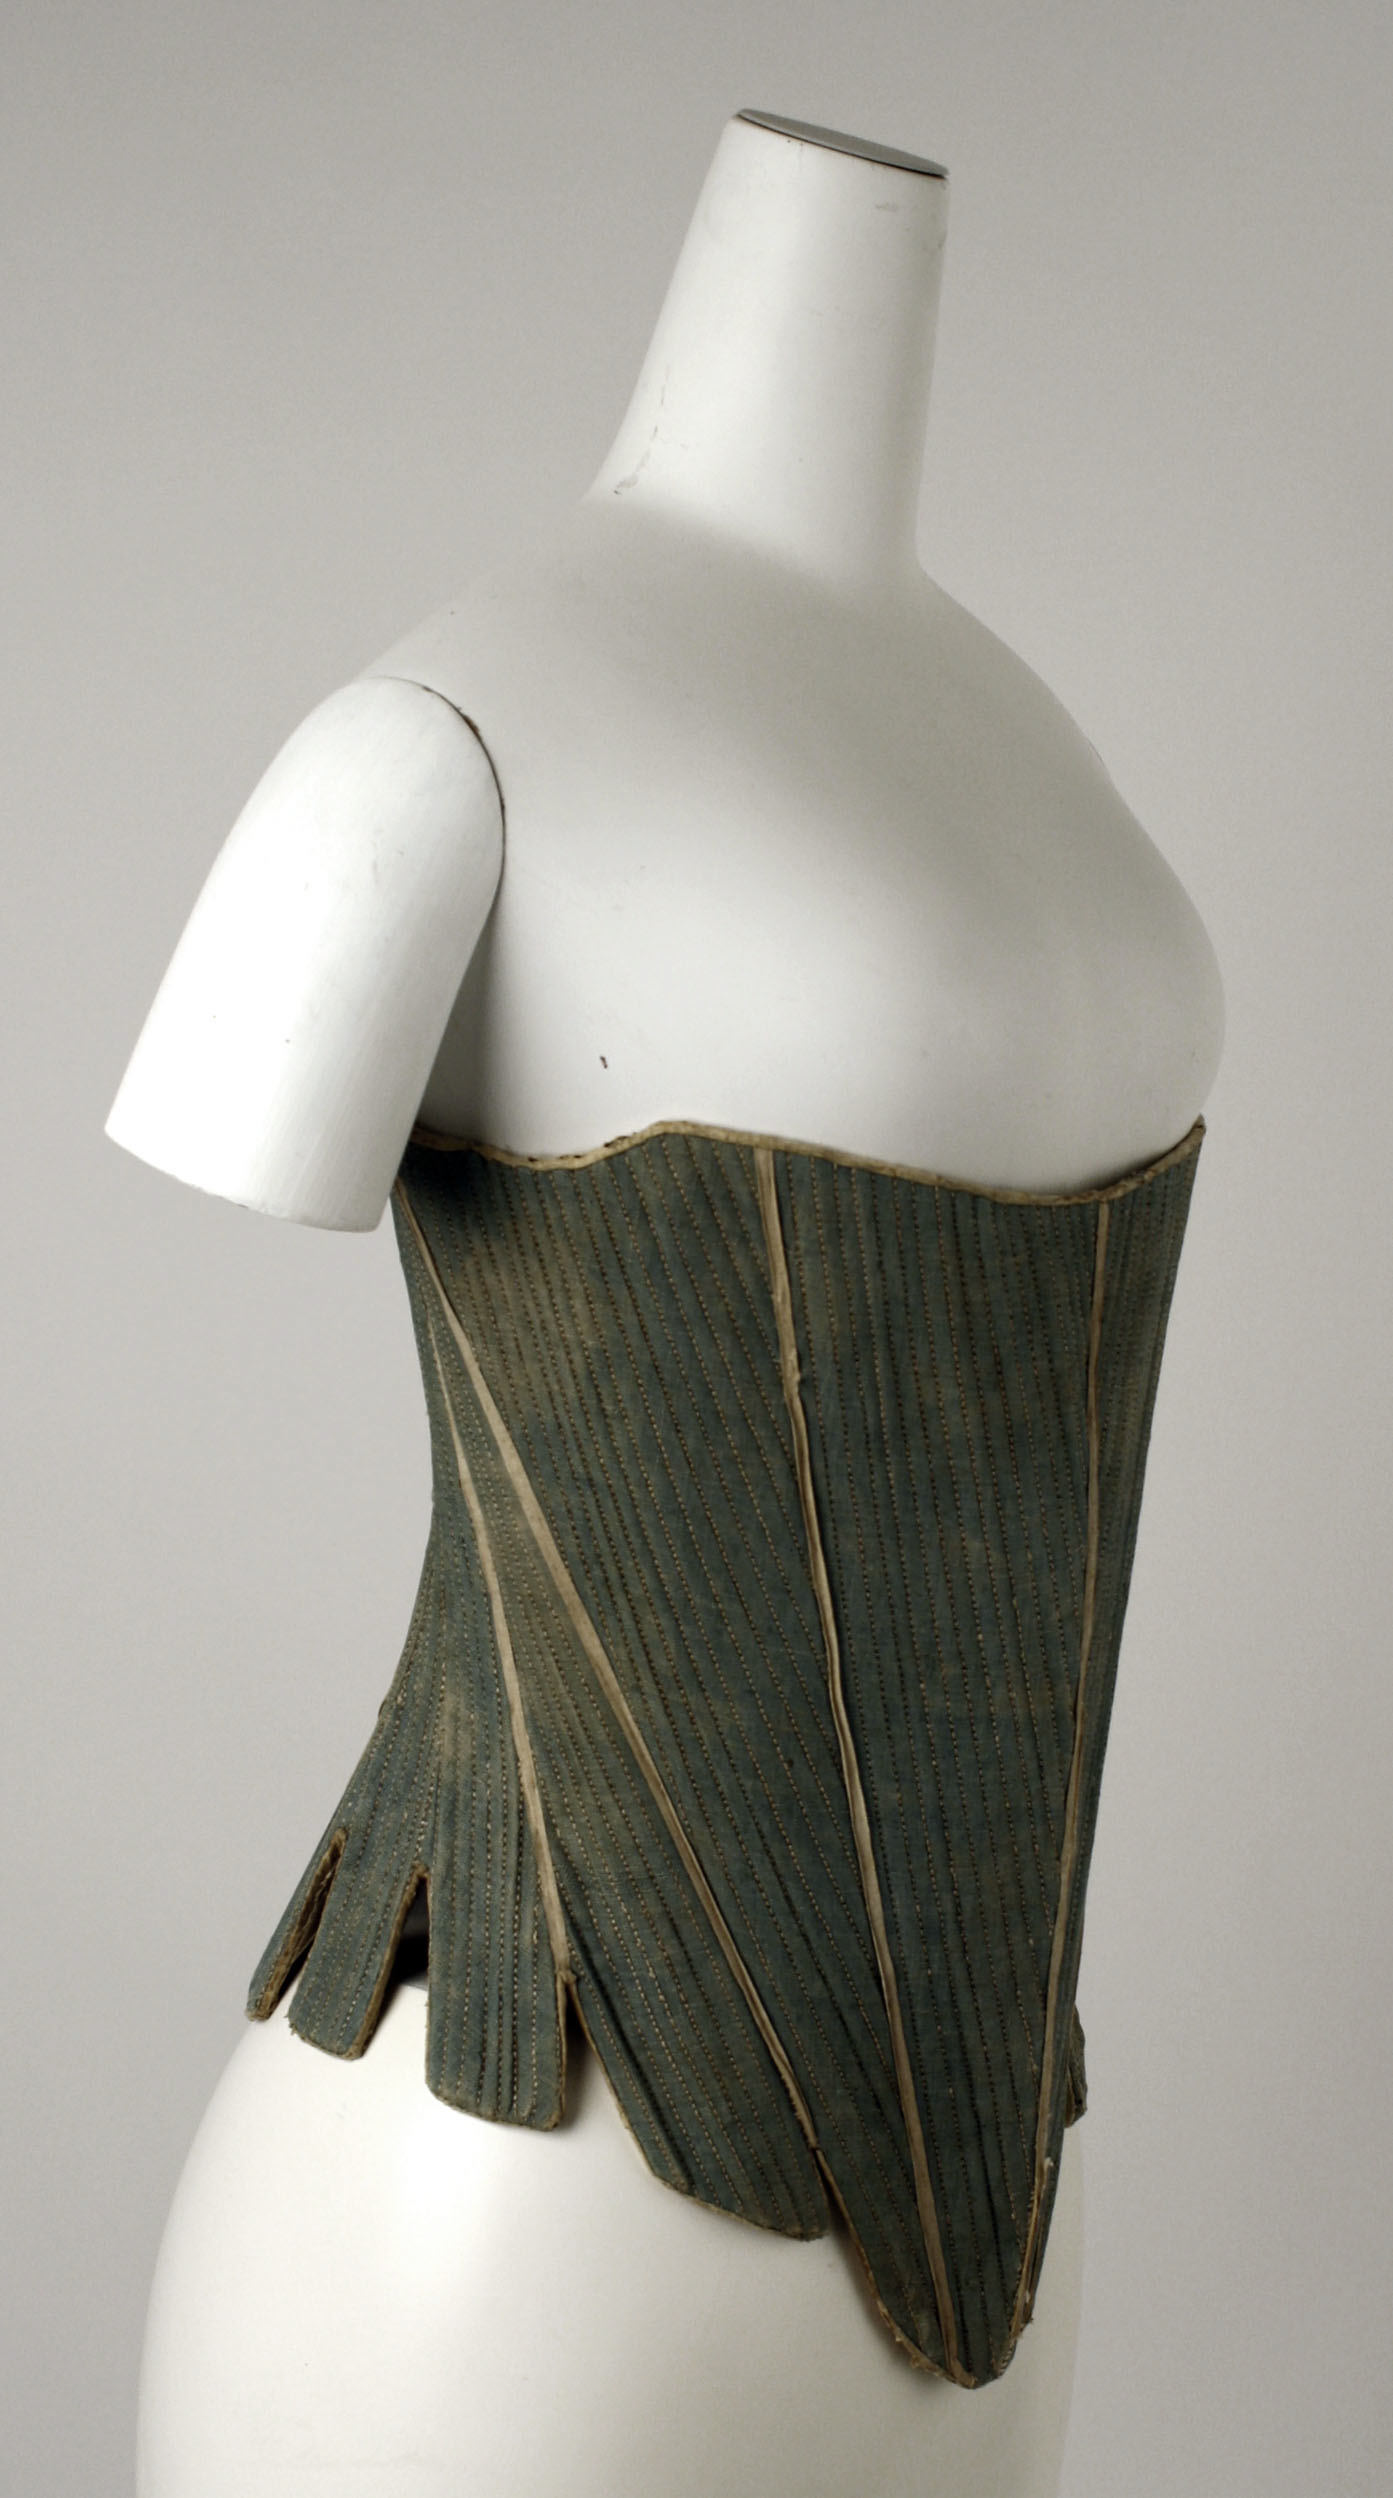 Stays, third quarter 18th century, American, flax, cotton, leather, wood Gift of Jacqueline Loewe Fowler, 1983, Metropolitan Museum of Art, 1983.213.4